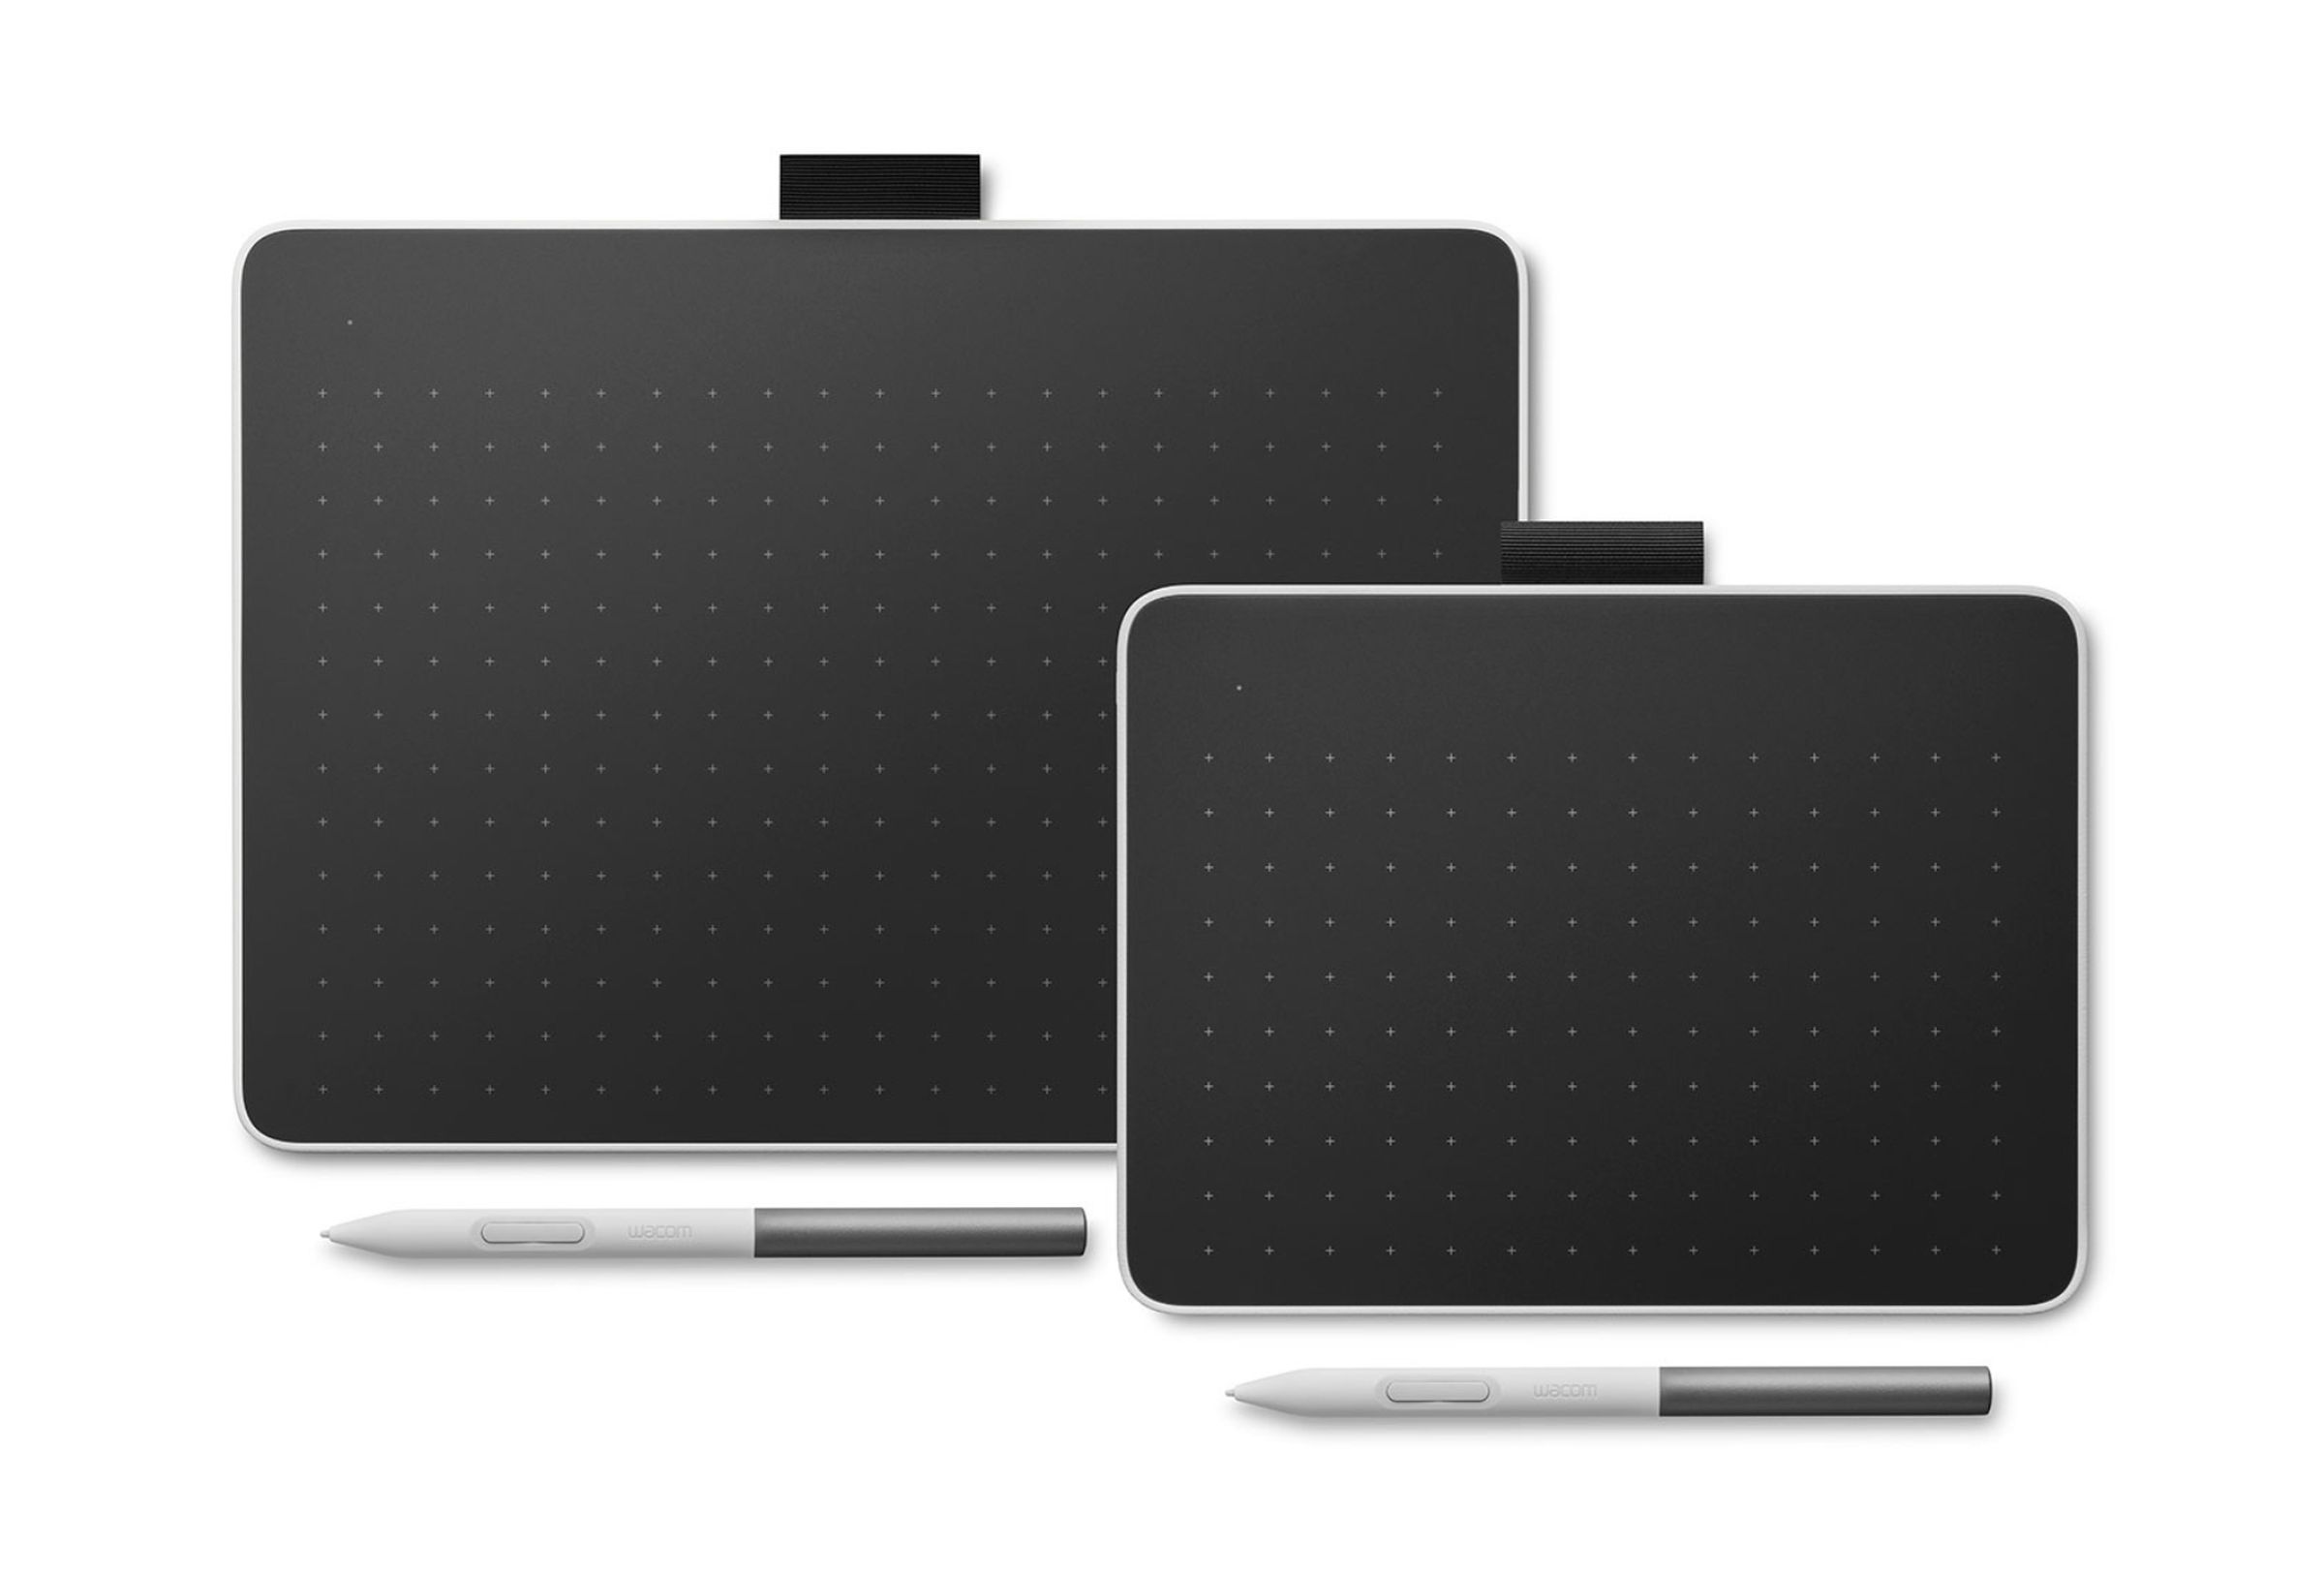 The Wacom One S and Wacom One M drawing tablets against a plain white backdrop.